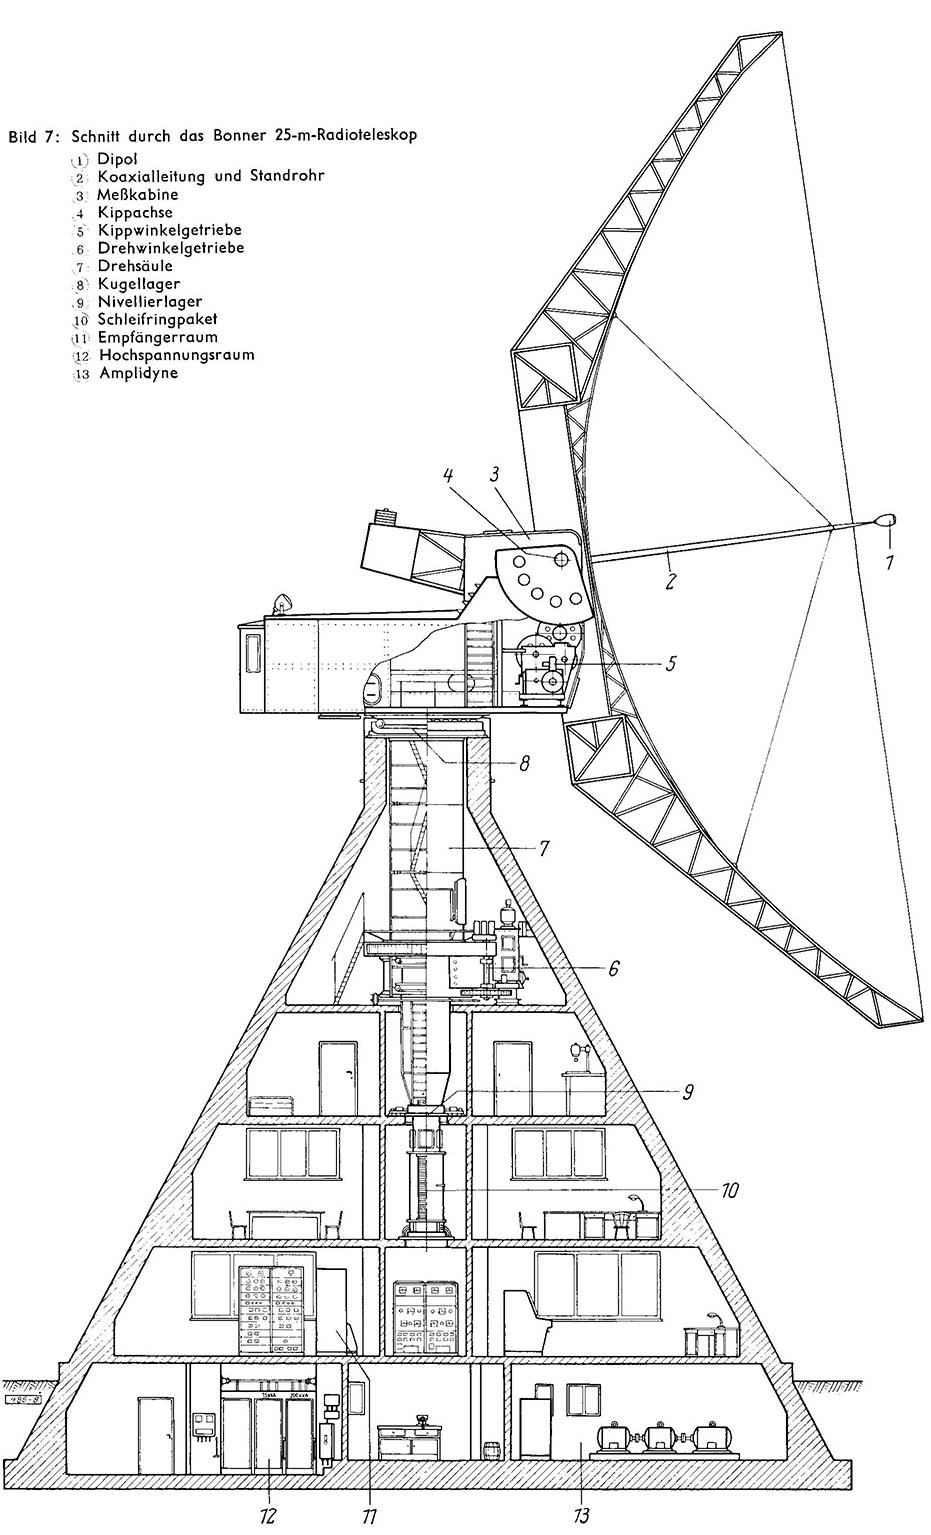 The original technical drawing of the 25m Stockert